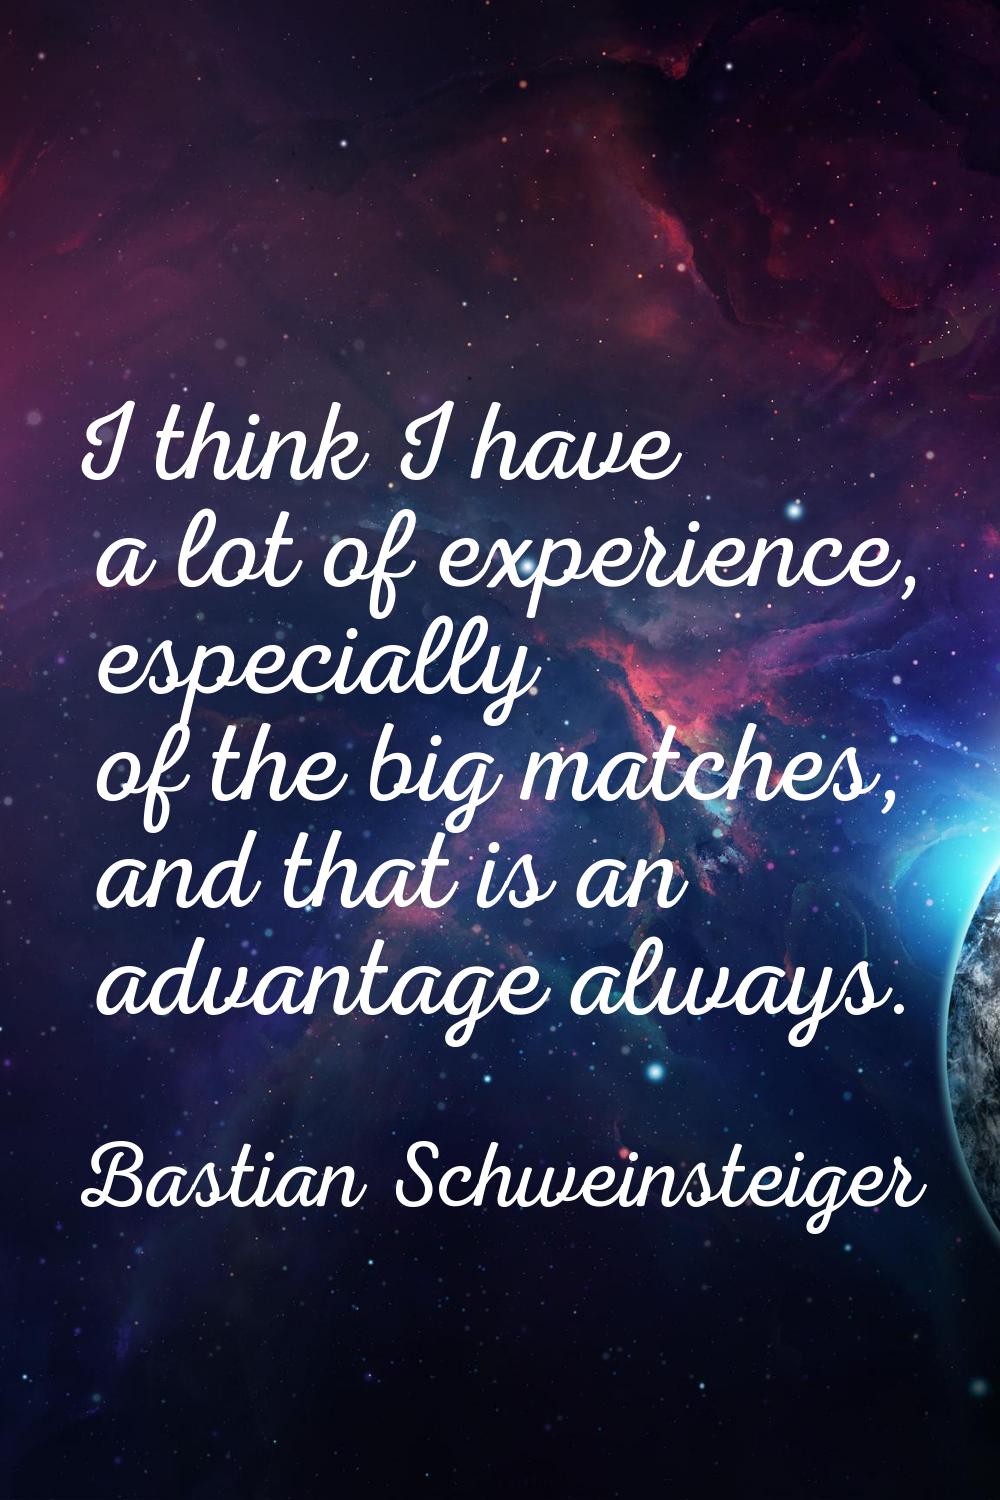 I think I have a lot of experience, especially of the big matches, and that is an advantage always.